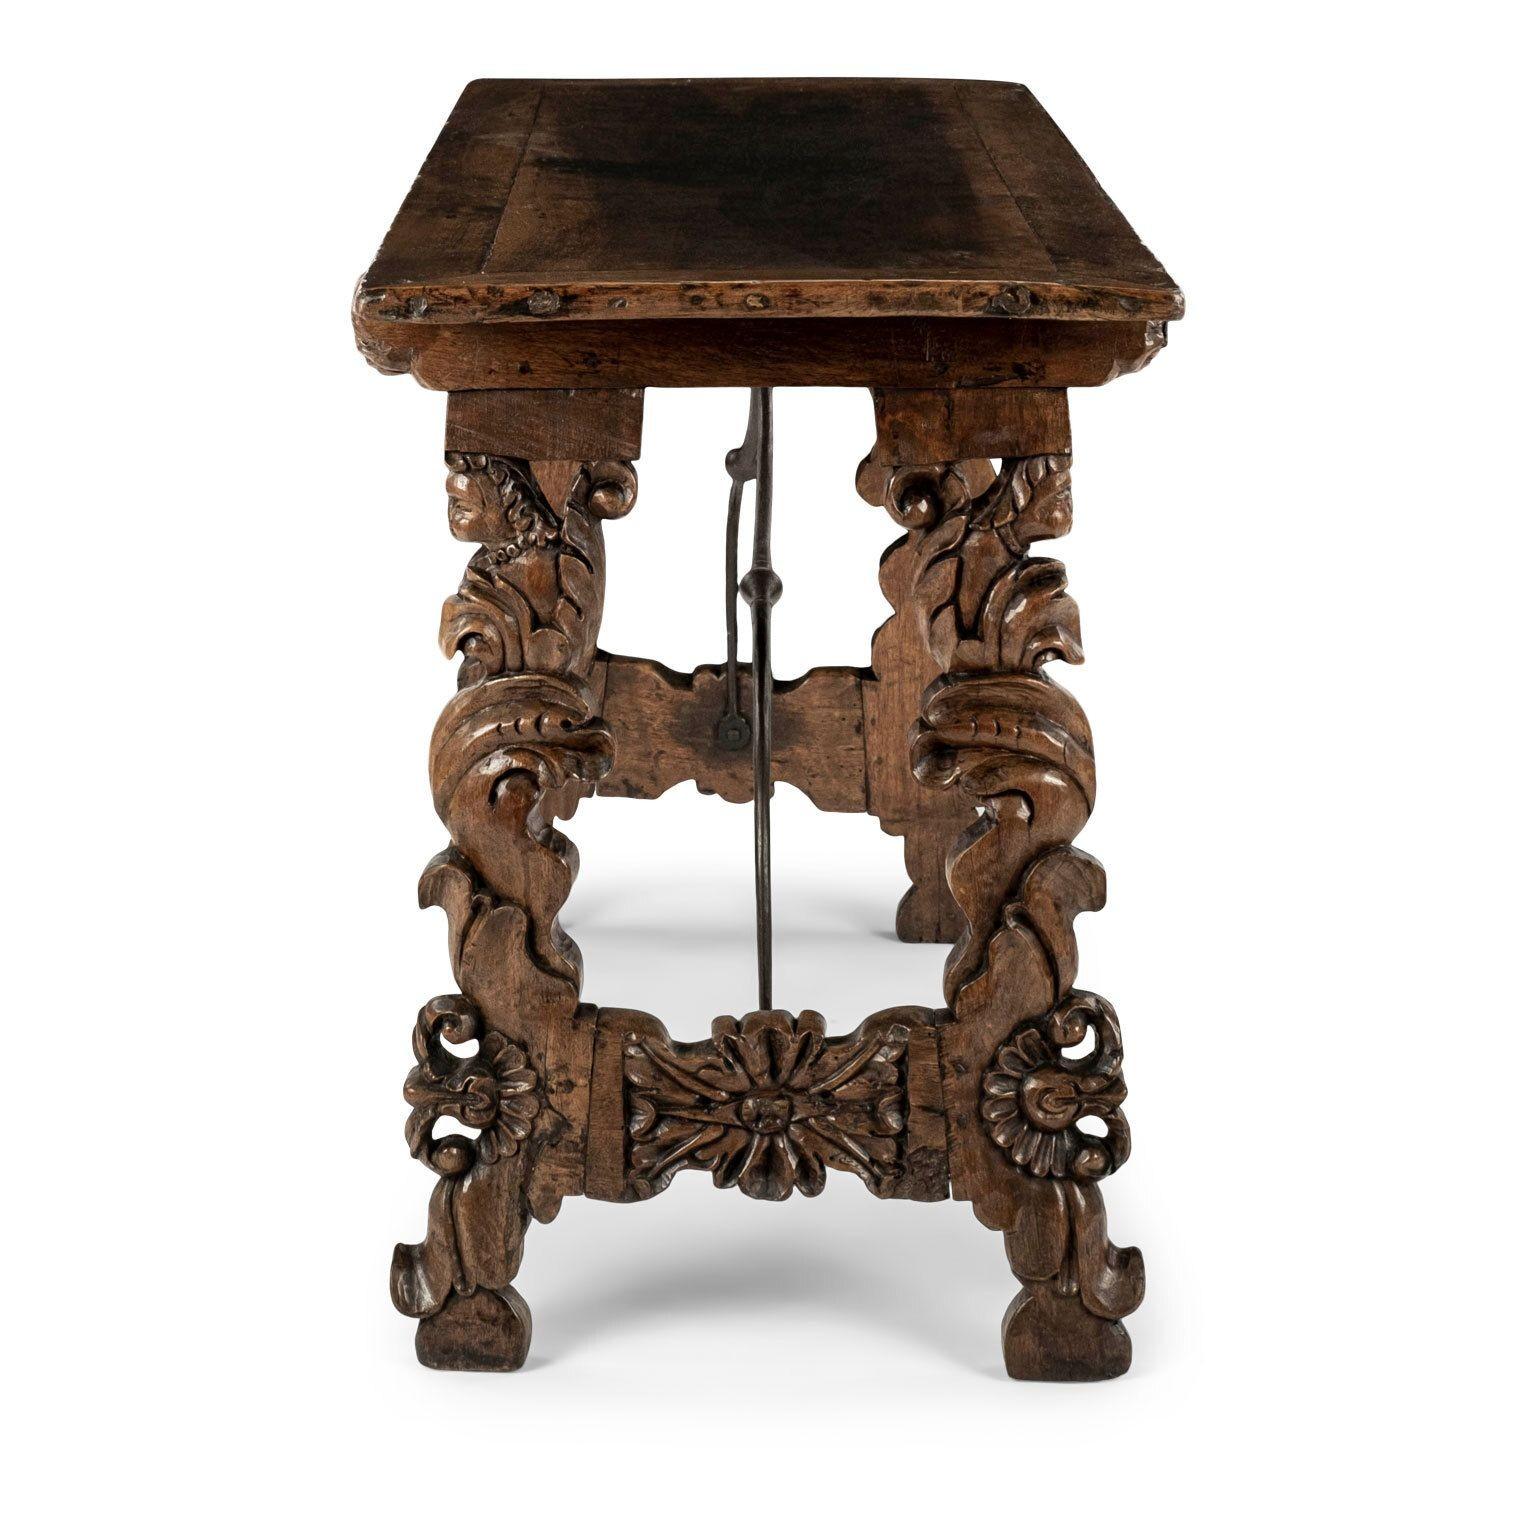 17th century Italian brown walnut console table circa 1660-1690. All-original: rectangular top, scrolled iron trestle support, ornately carved feet/legs and remnants of original - or early - asphaltum finish. Exceptional example of an early